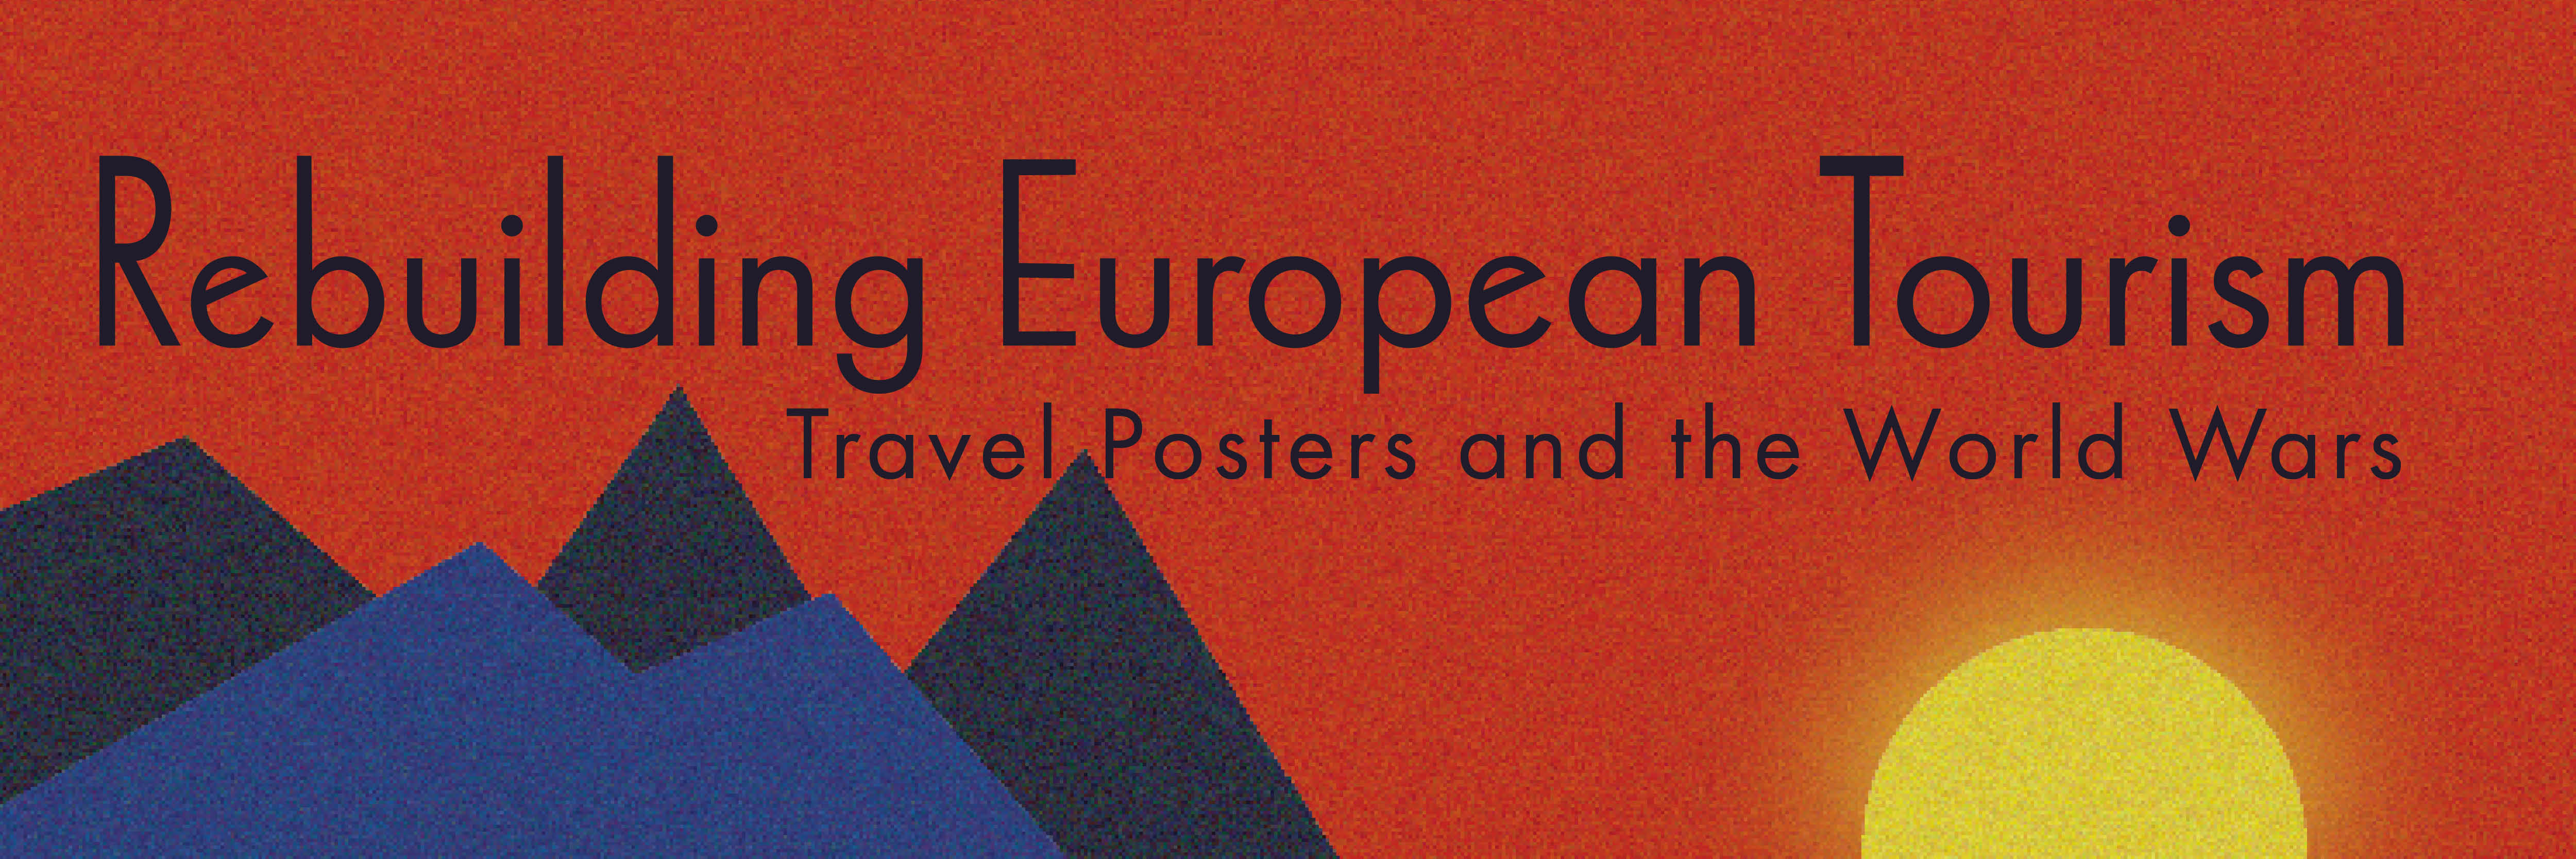 Rebuilding European Tourism: Travel Posters and the World Wars